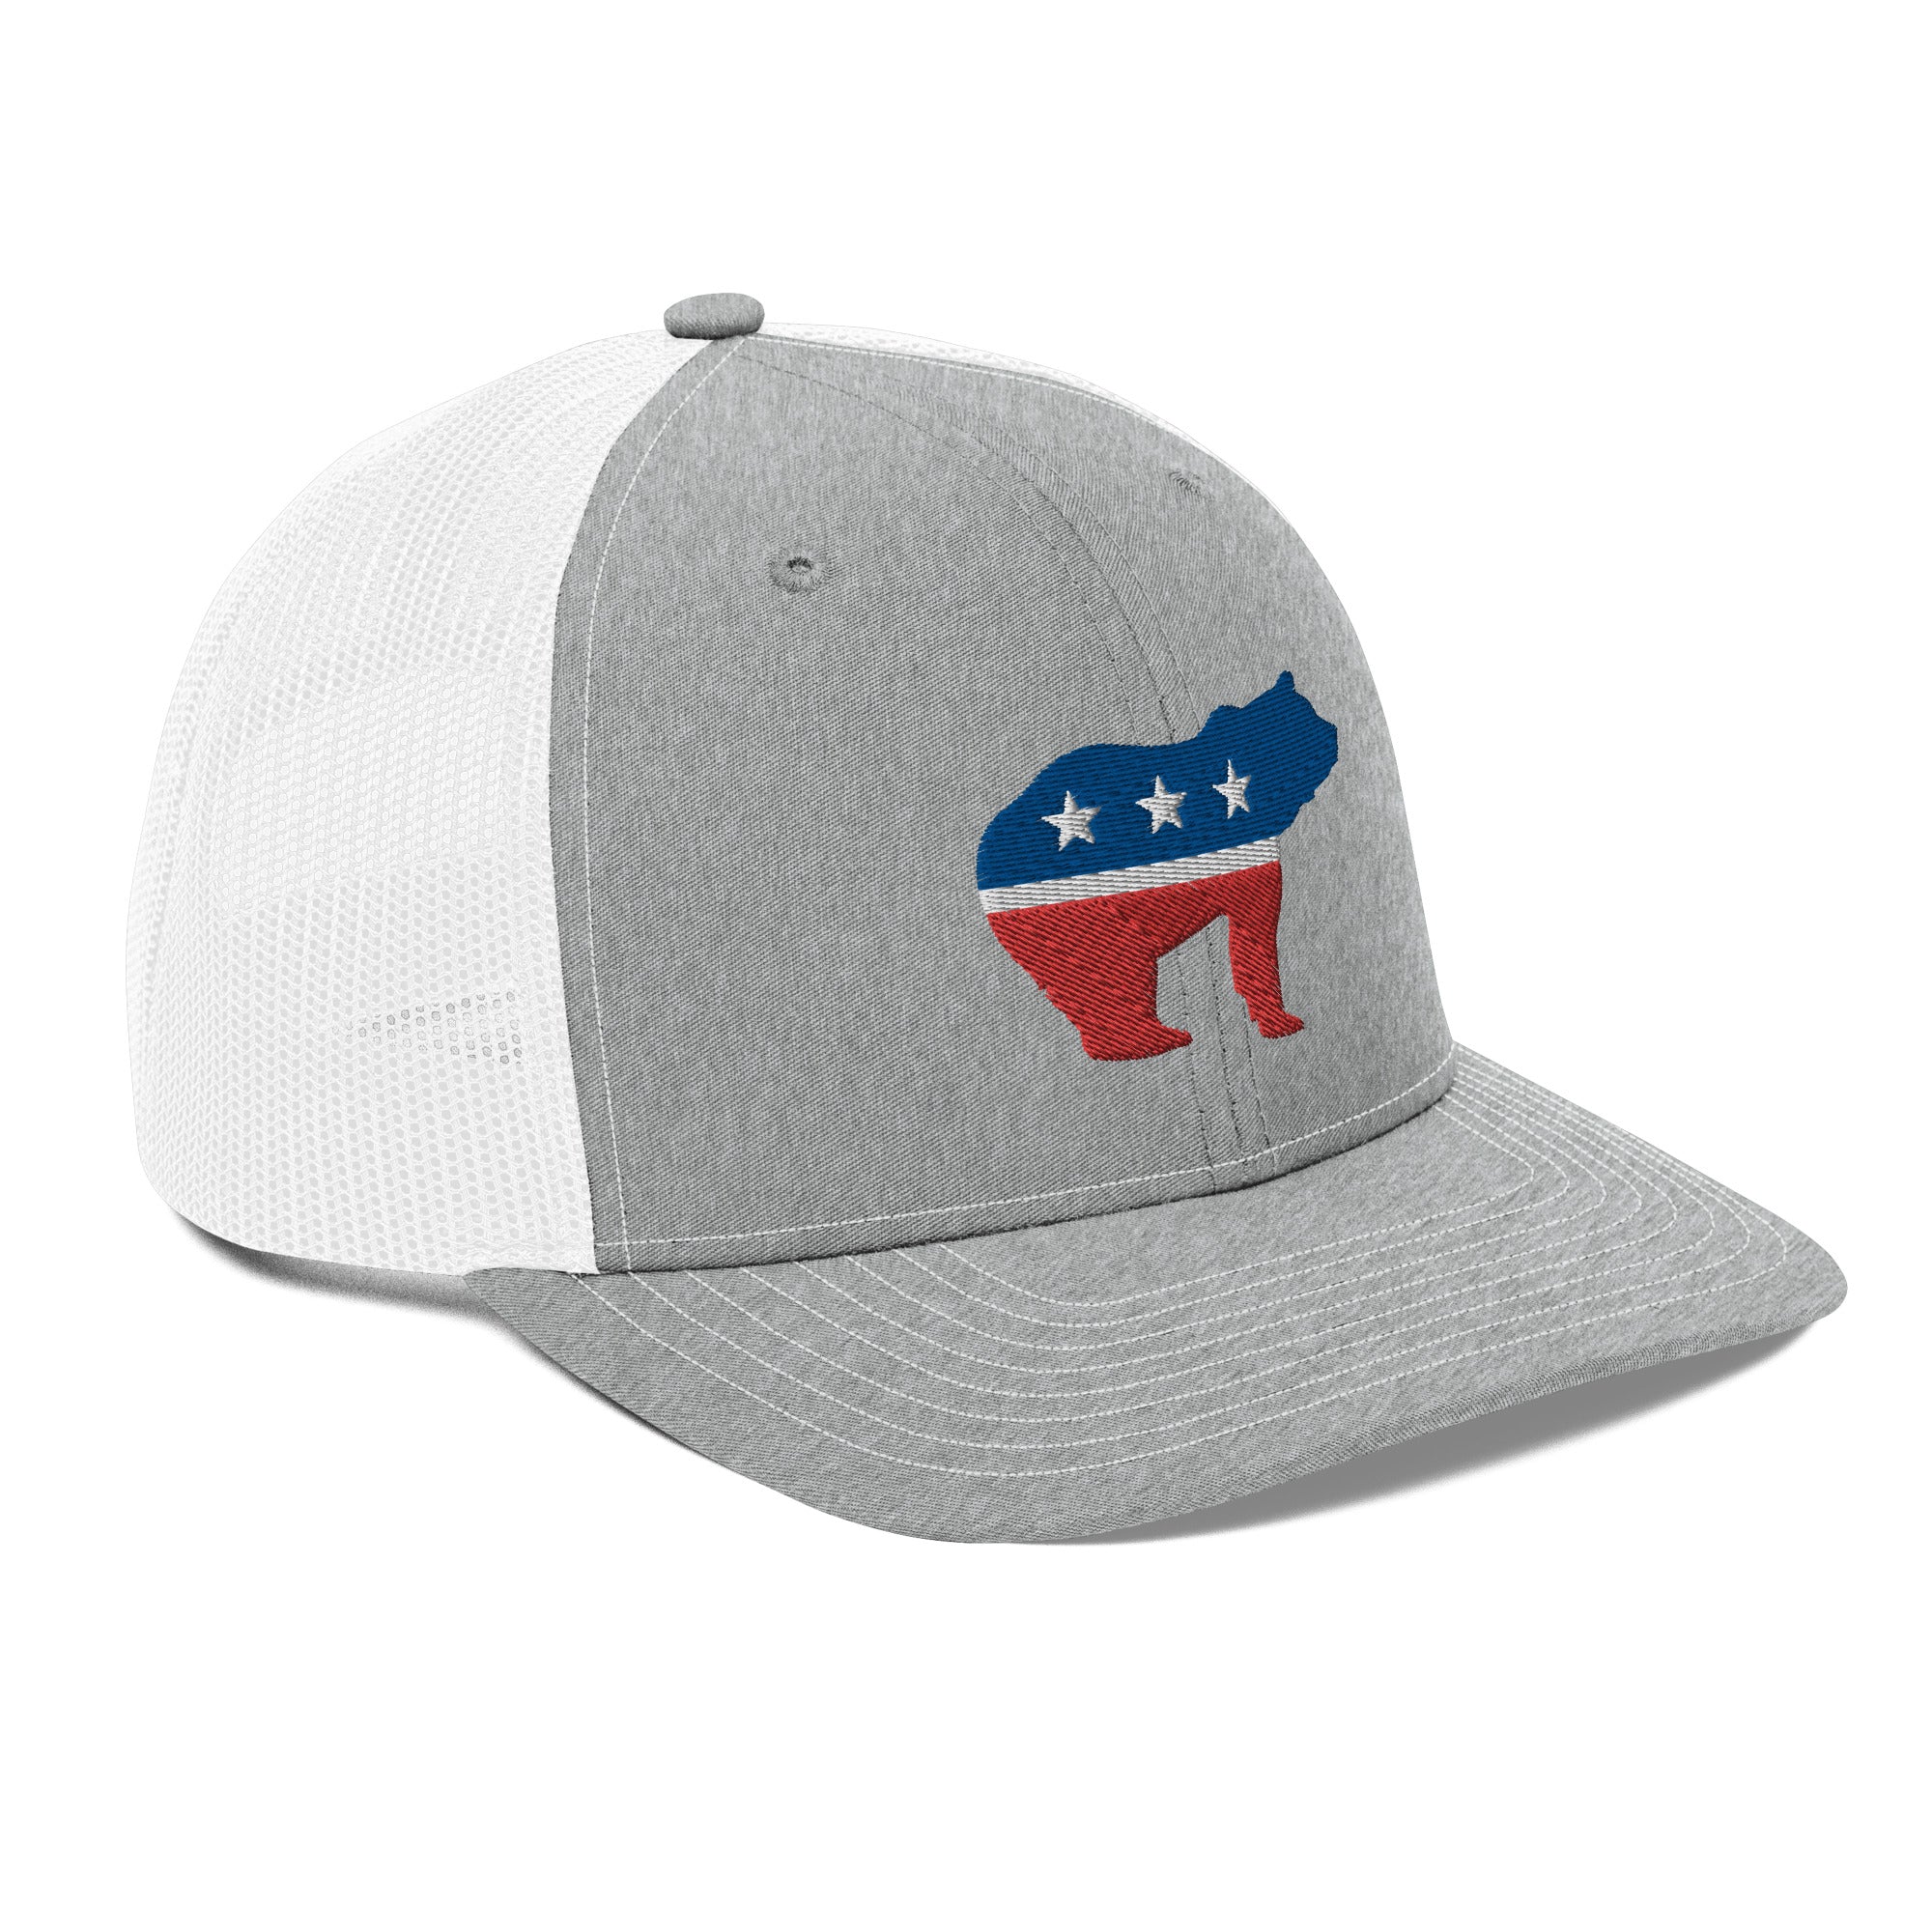 Independent Grizzly Bear Trucker Cap